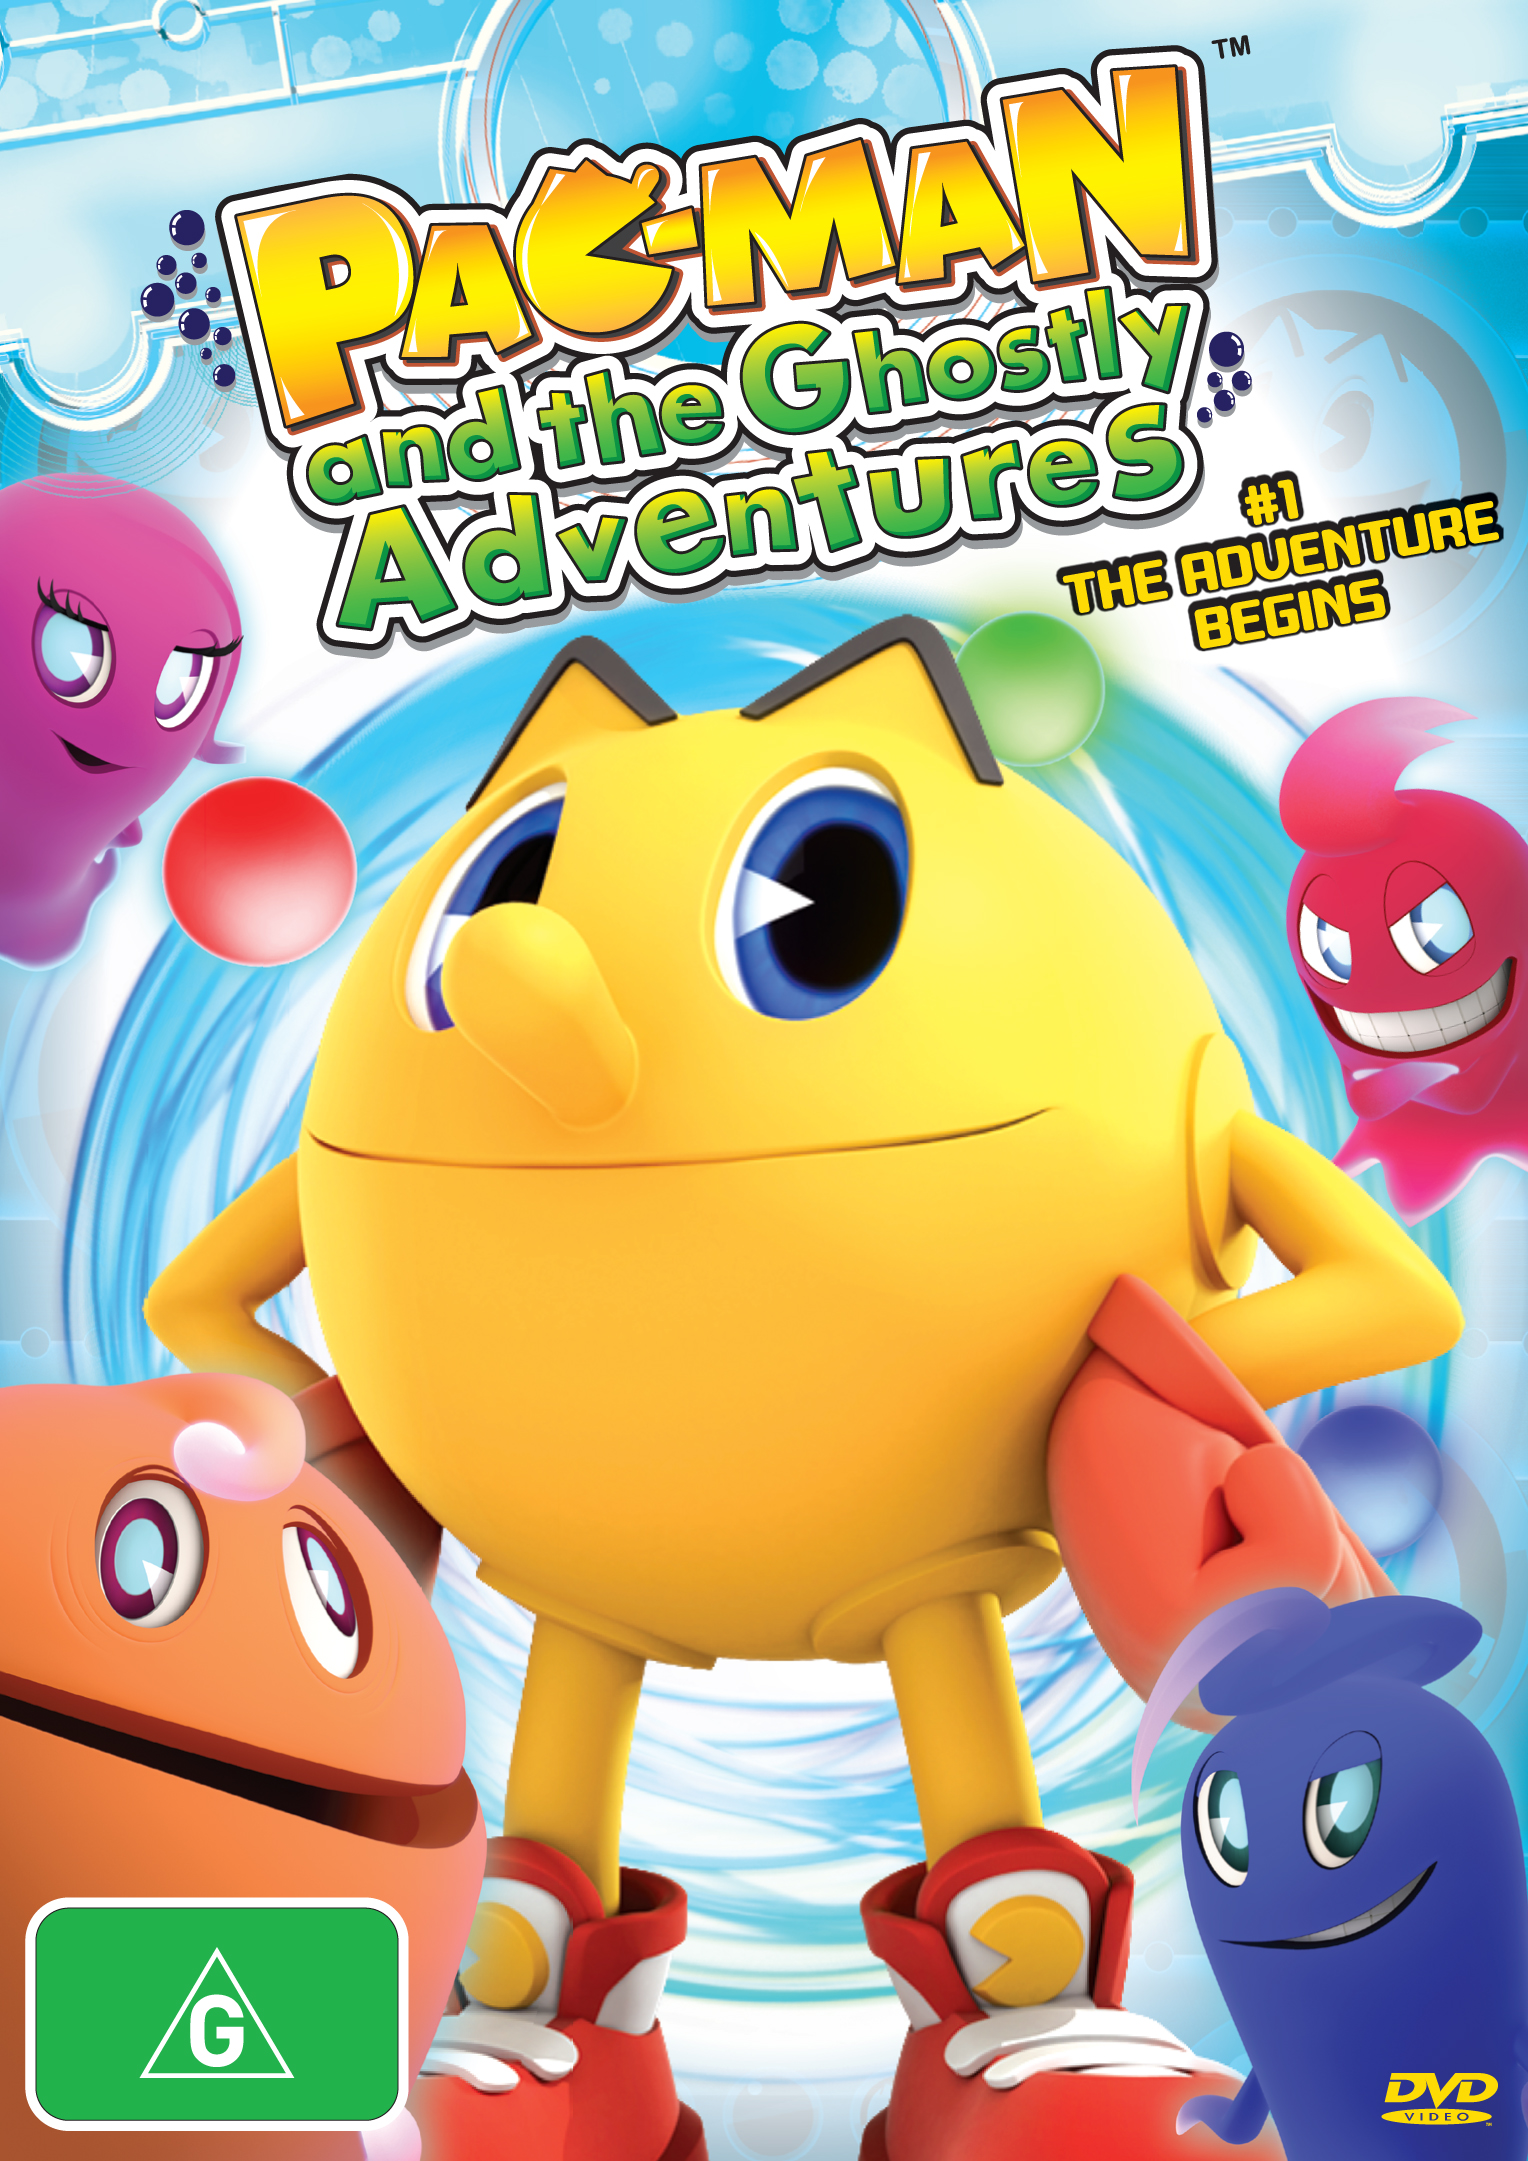 Pac-Man And The Ghostly Adventures: Adventure Begins Review.